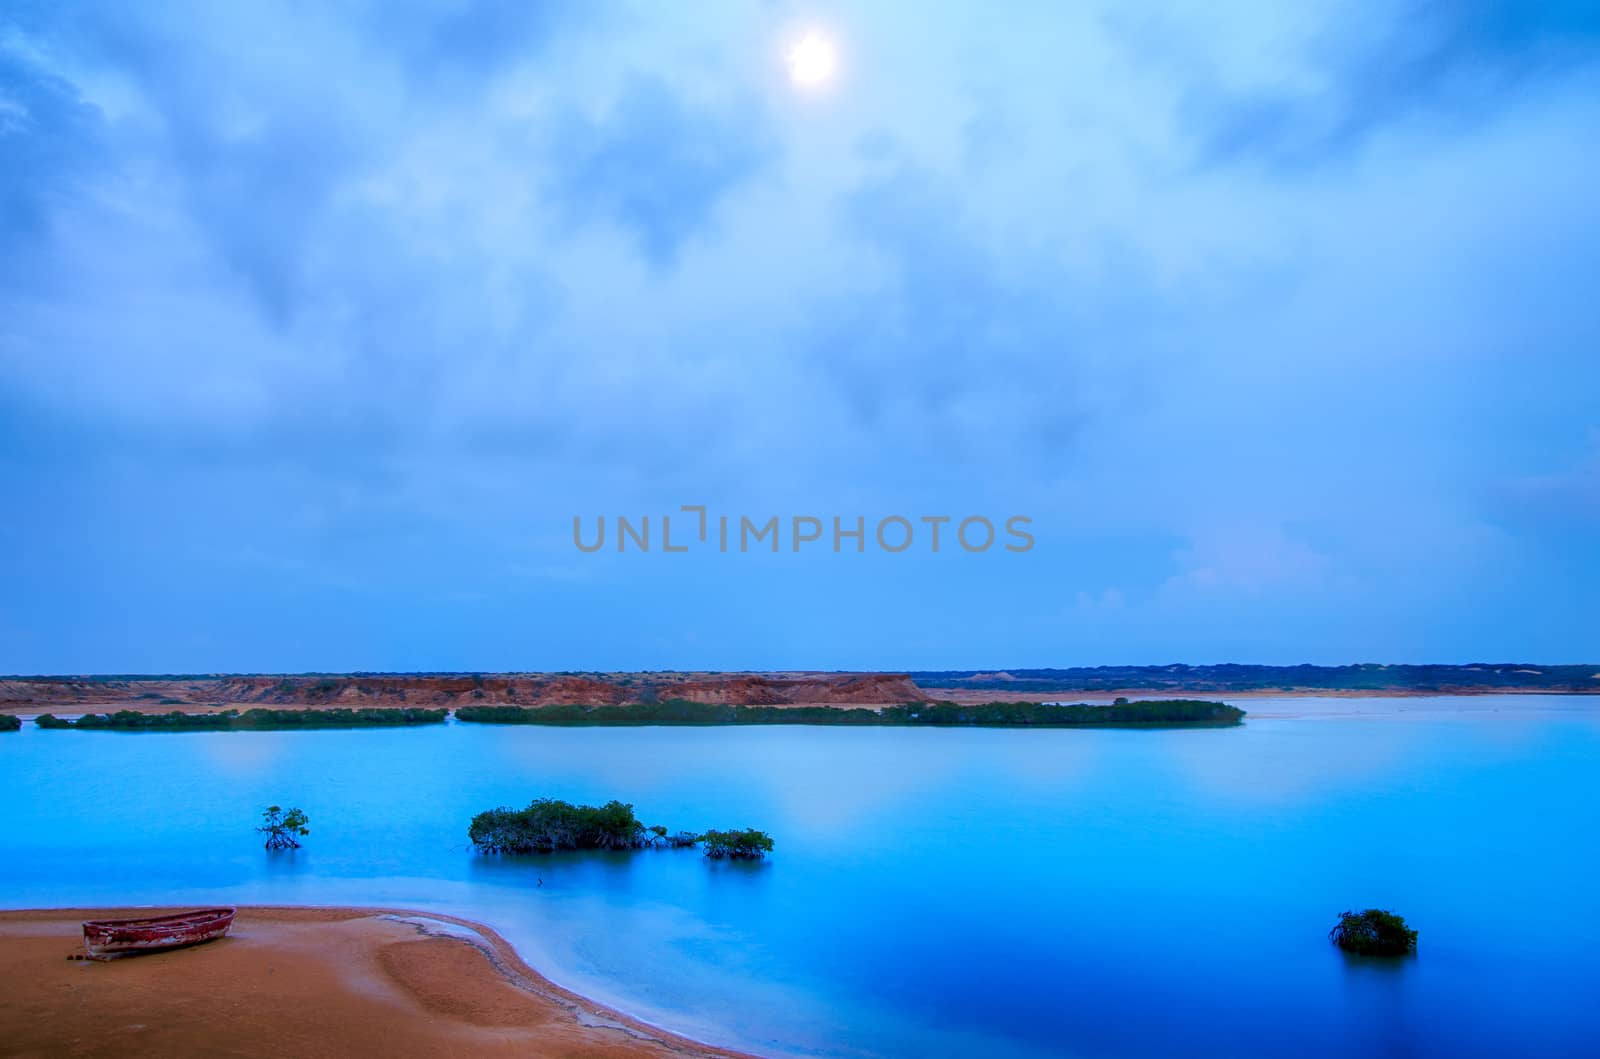 Late evening view of the bay of Punta Gallinas in La Guajira, Colombia